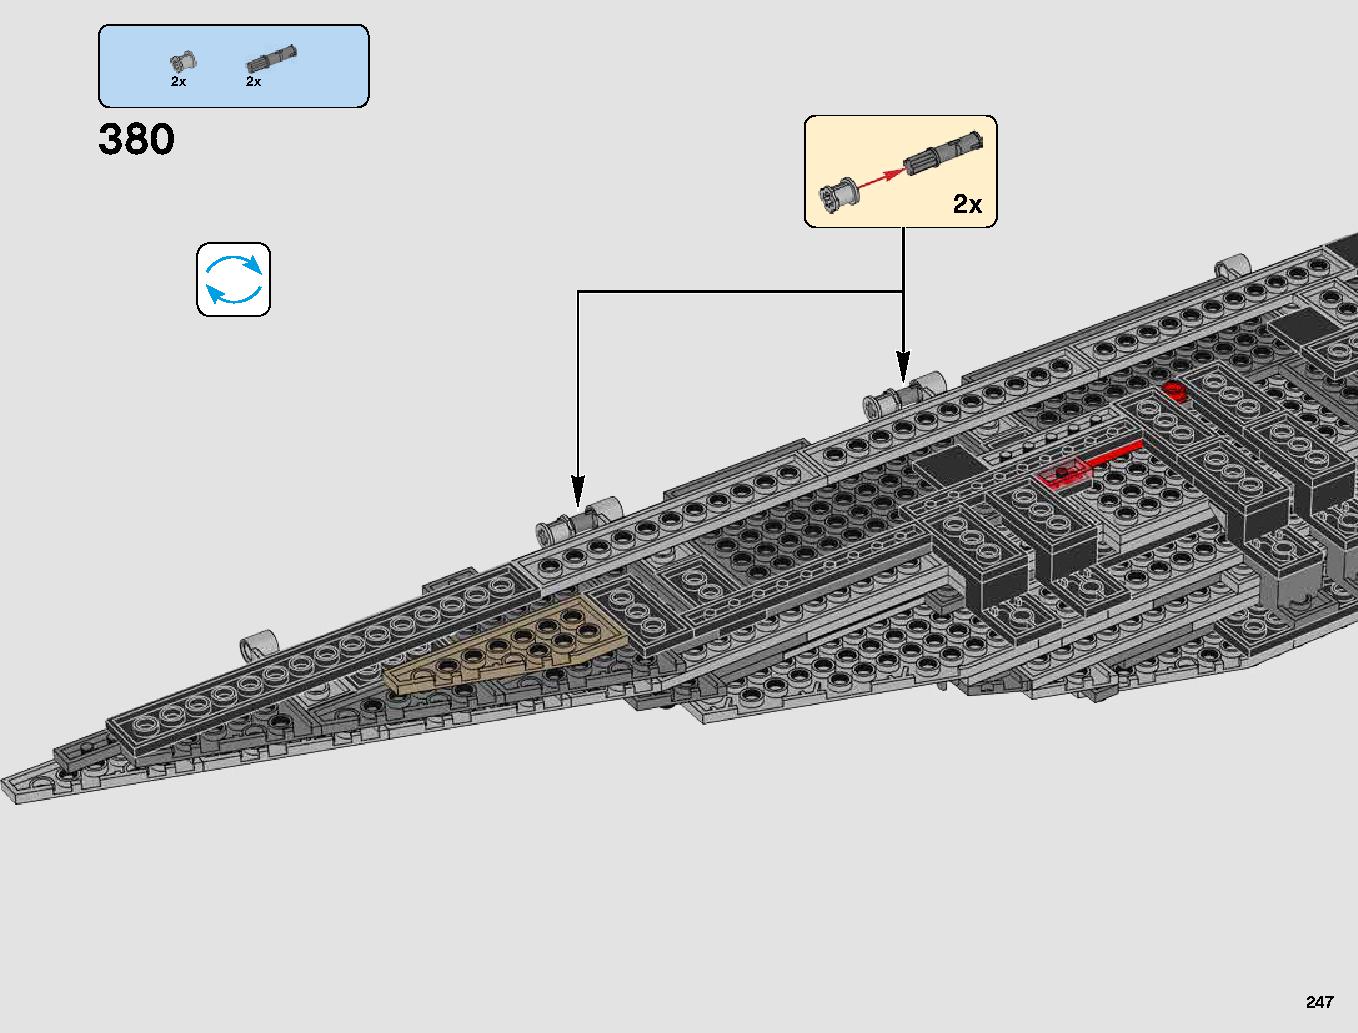 First Order Star Destroyer 75190 レゴの商品情報 レゴの説明書・組立方法 247 page